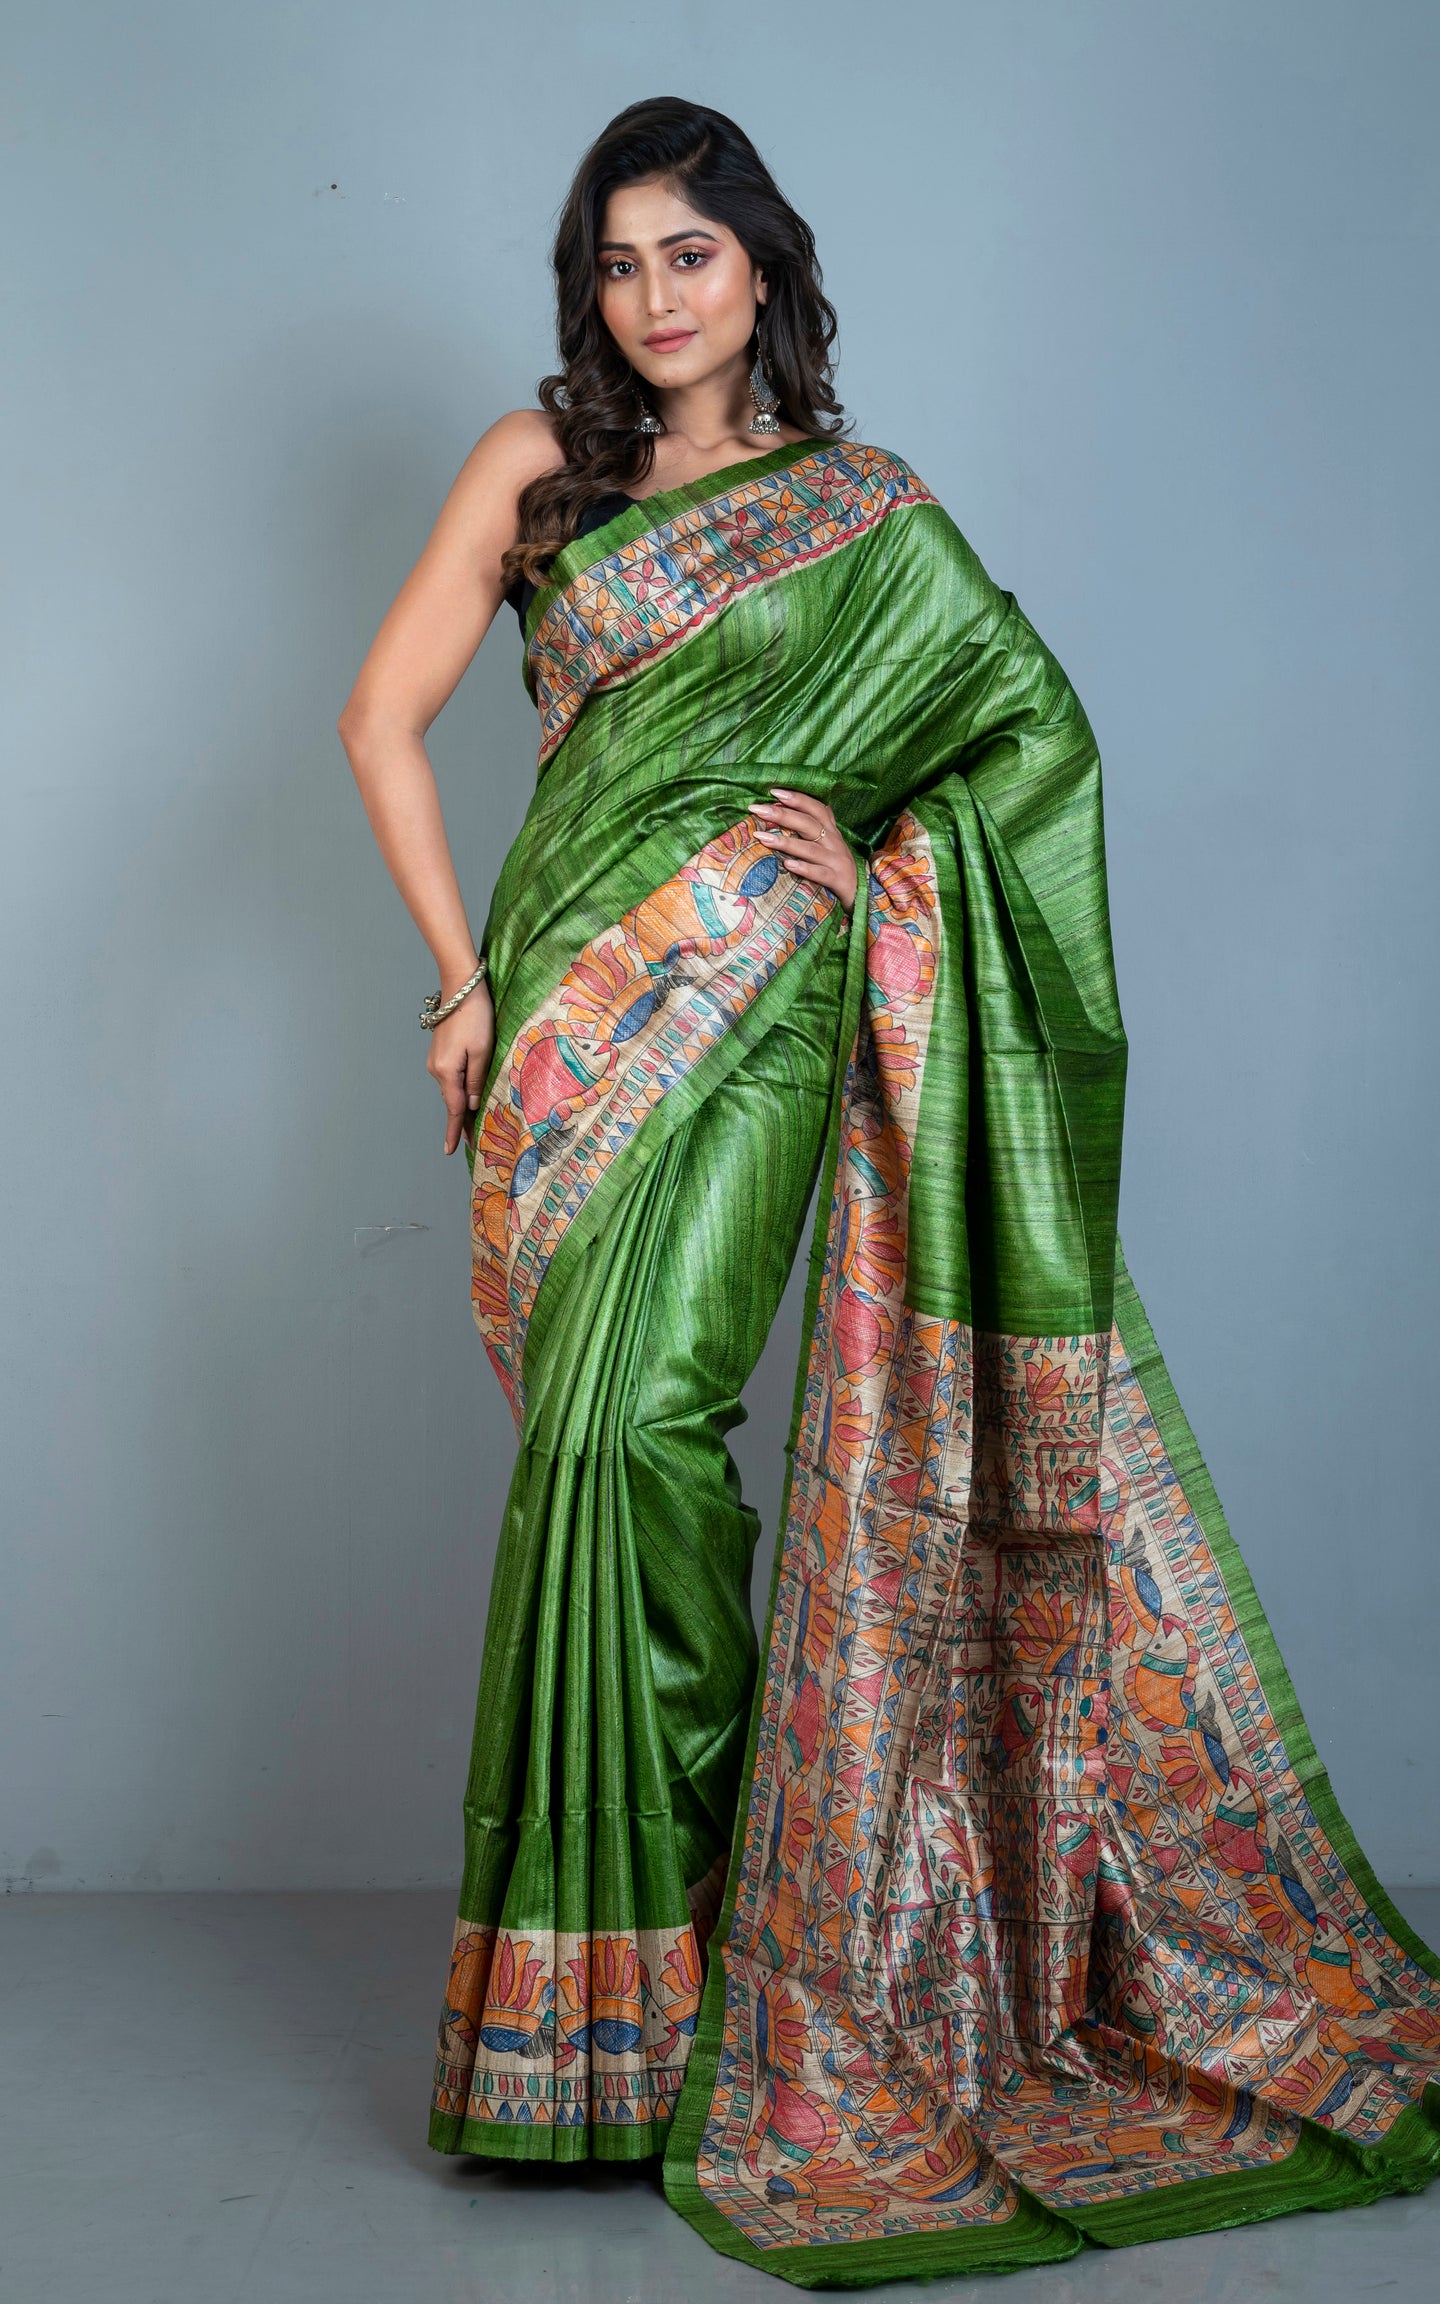 Hand Painted Madhubani on Handwoven Natural Gicha Tussar Silk Saree in Forest Green